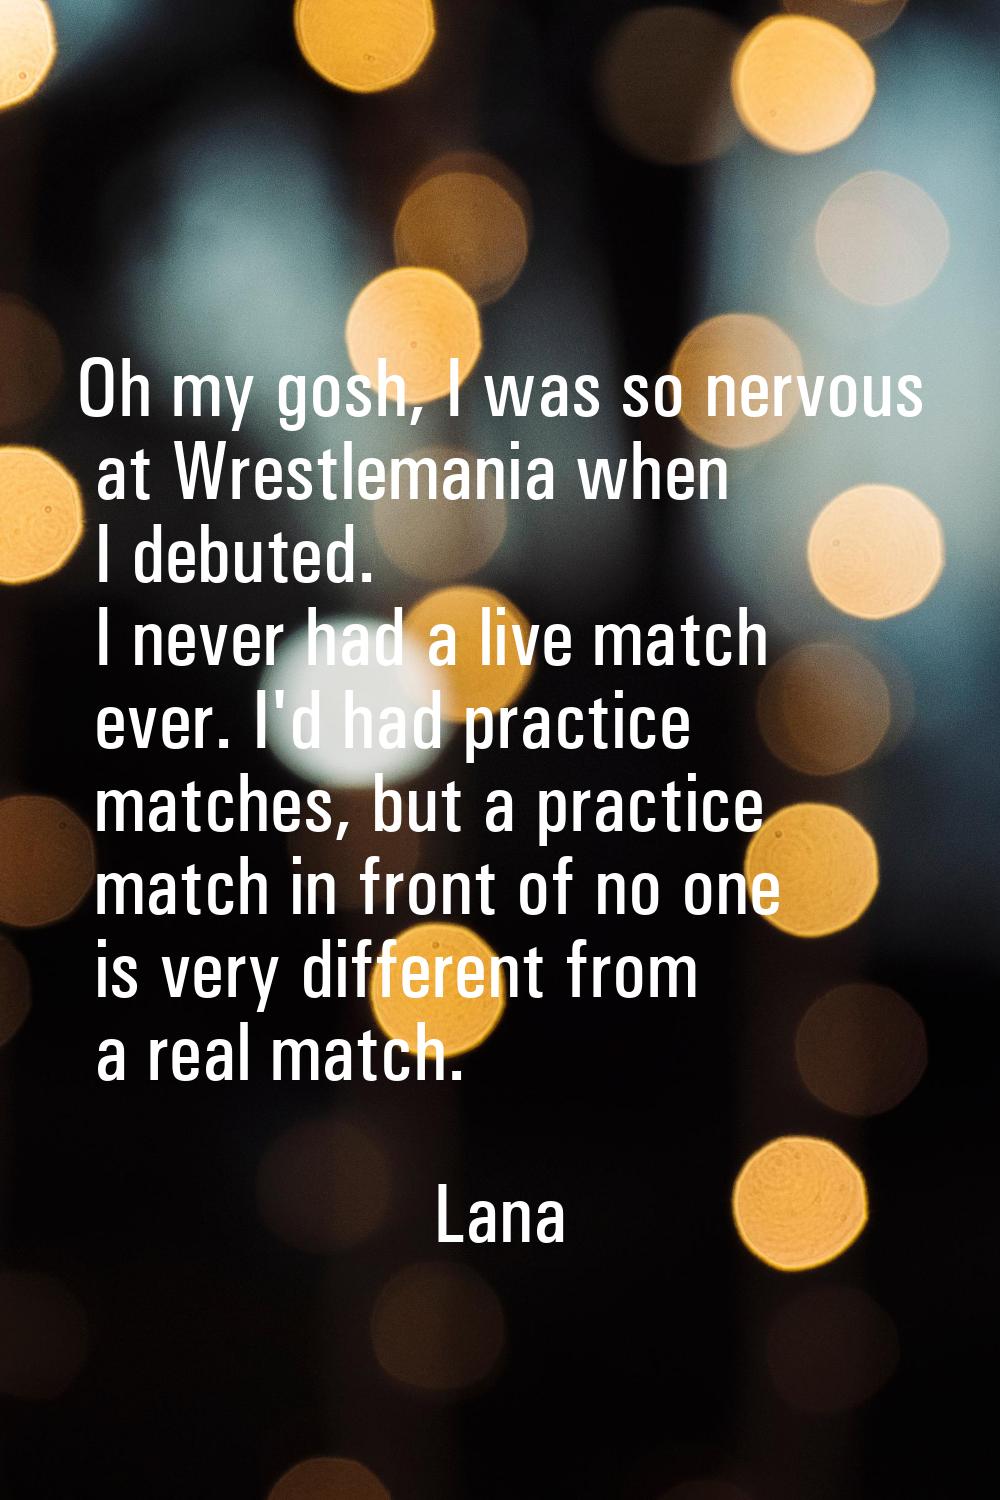 Oh my gosh, I was so nervous at Wrestlemania when I debuted. I never had a live match ever. I'd had